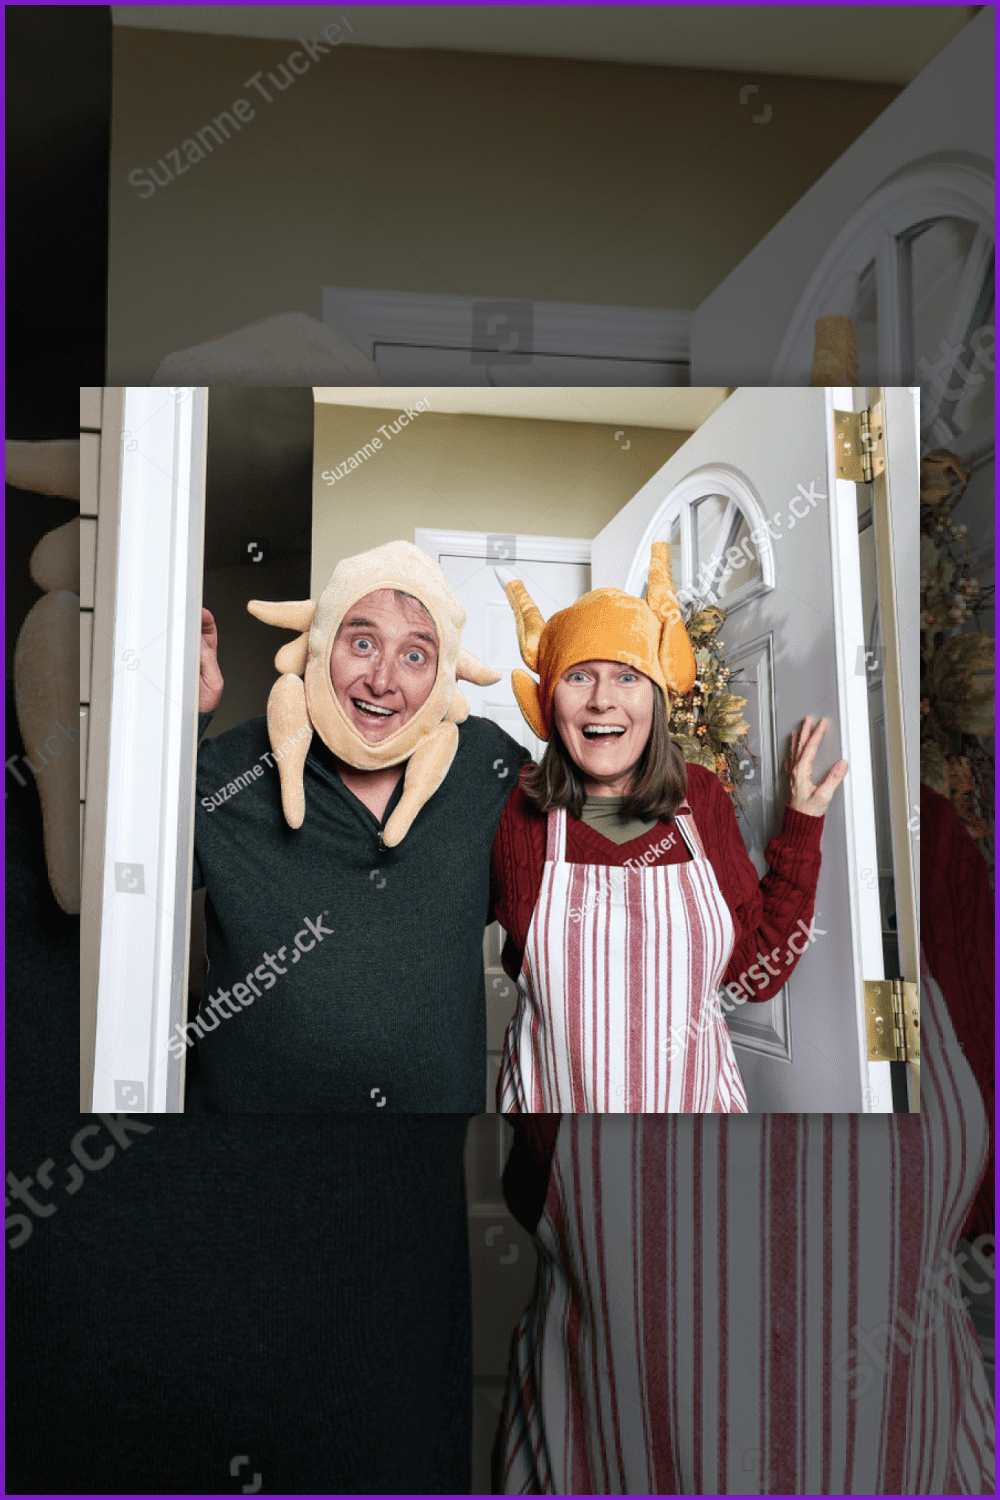 Cute photo of a couple wearing funny turkey hats.